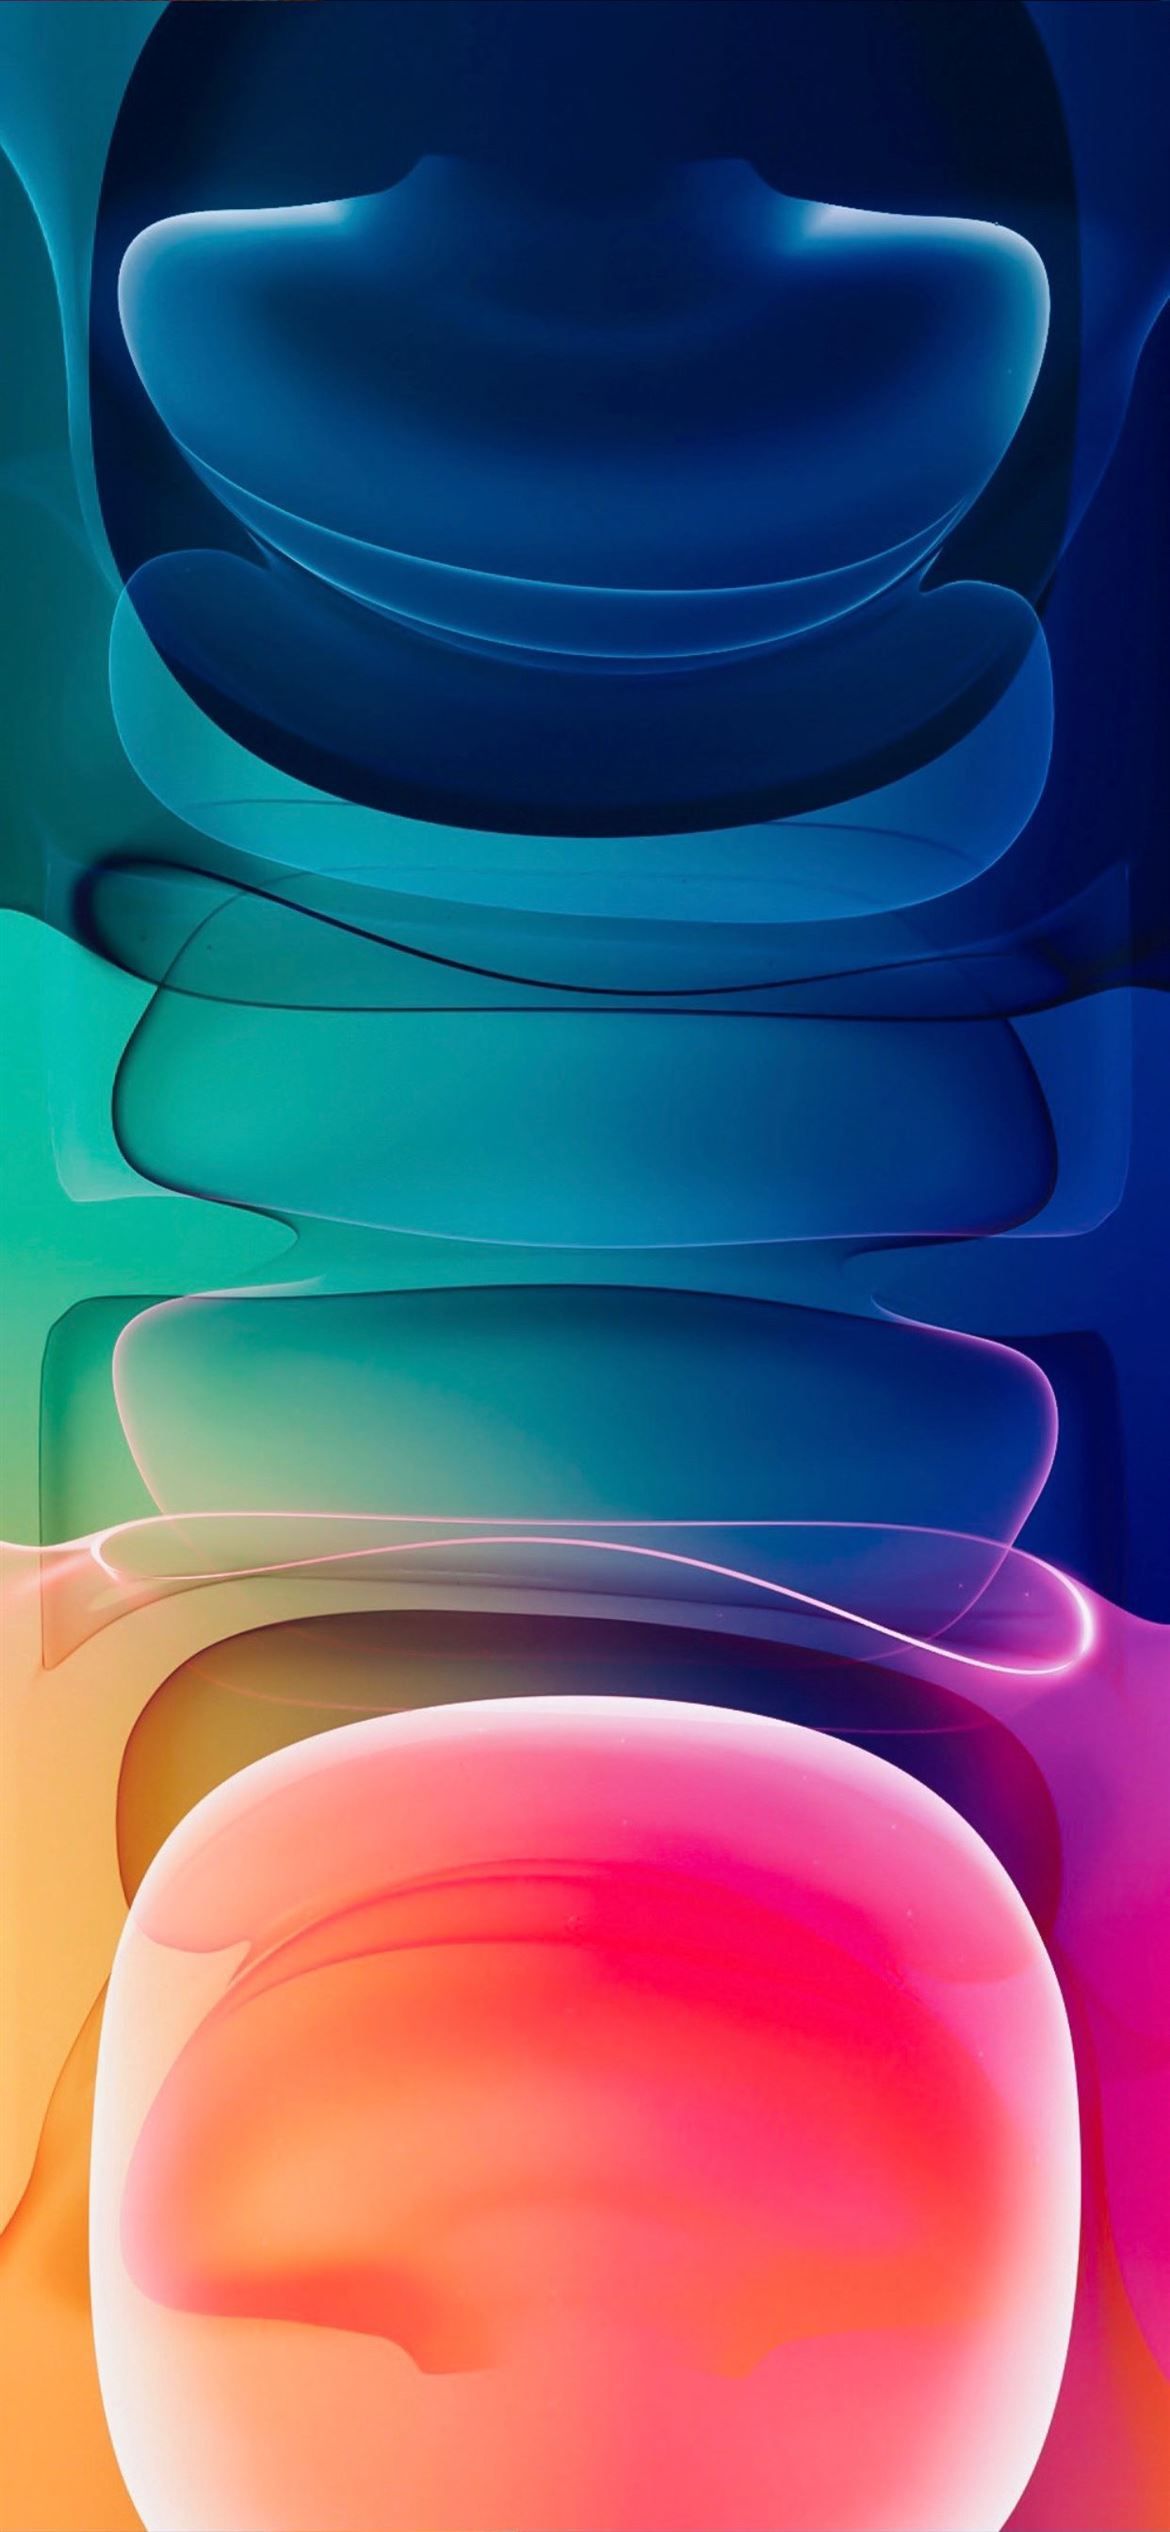 iPhone 12 Pro Max Wallpapers